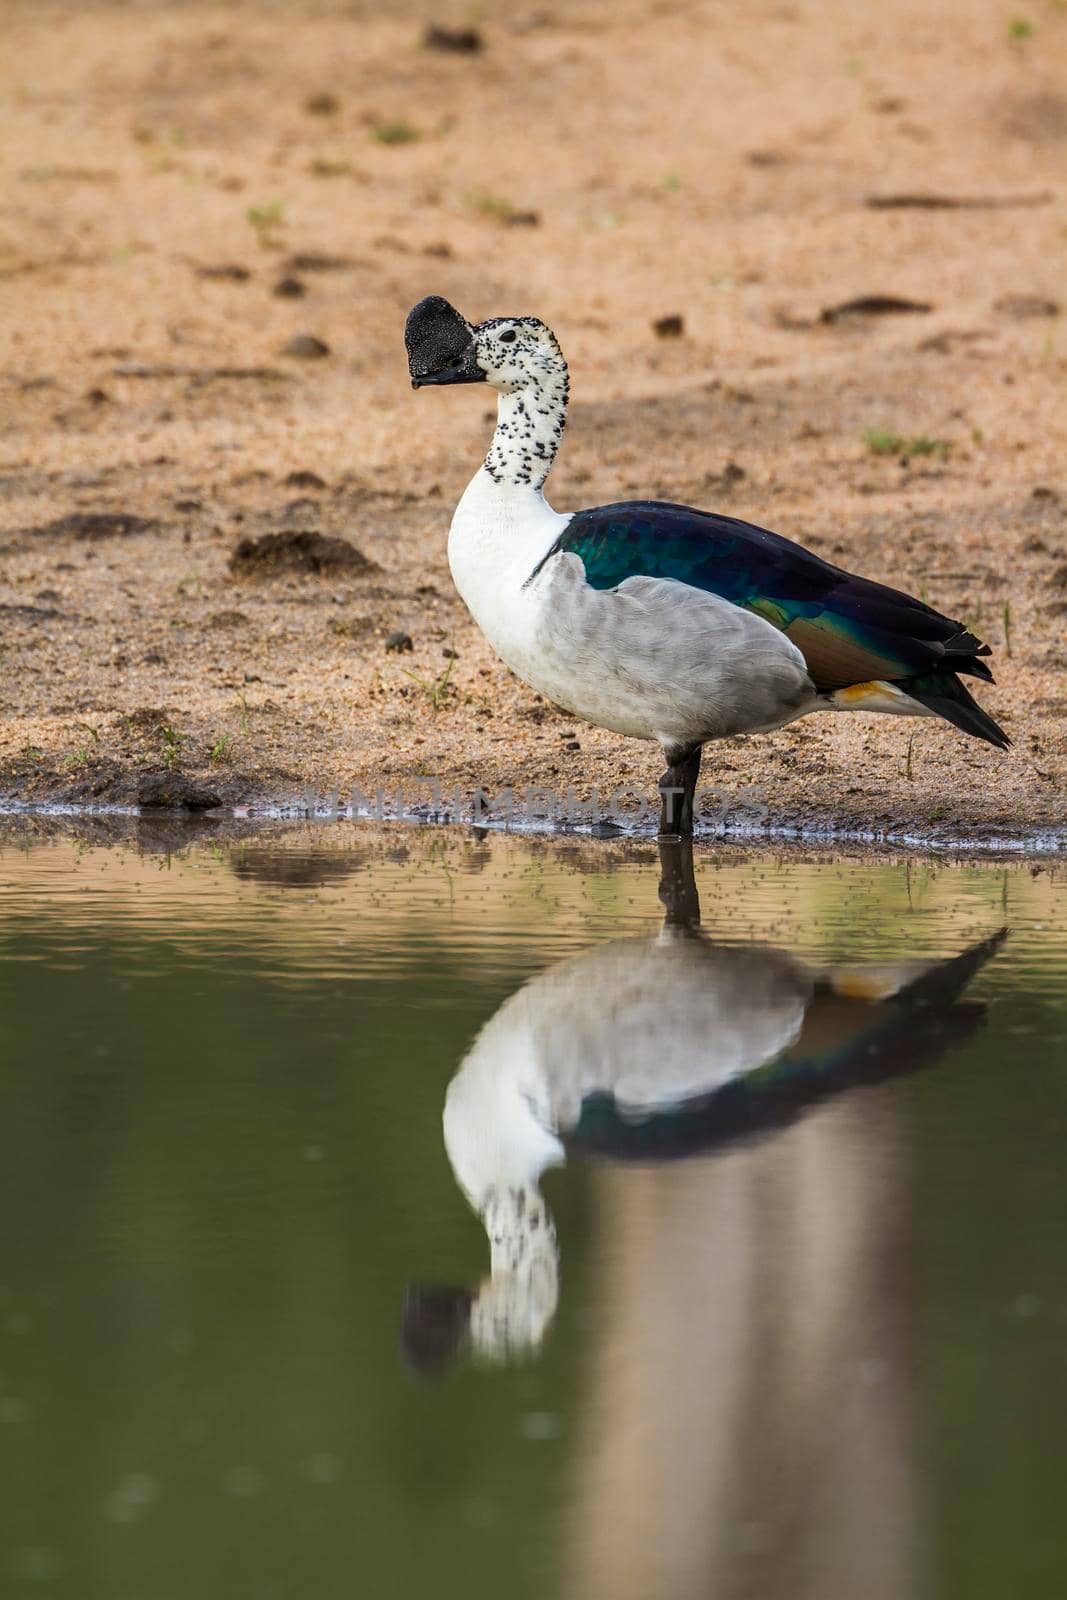 Knob billed duck in Kruger National park, South Africa by PACOCOMO